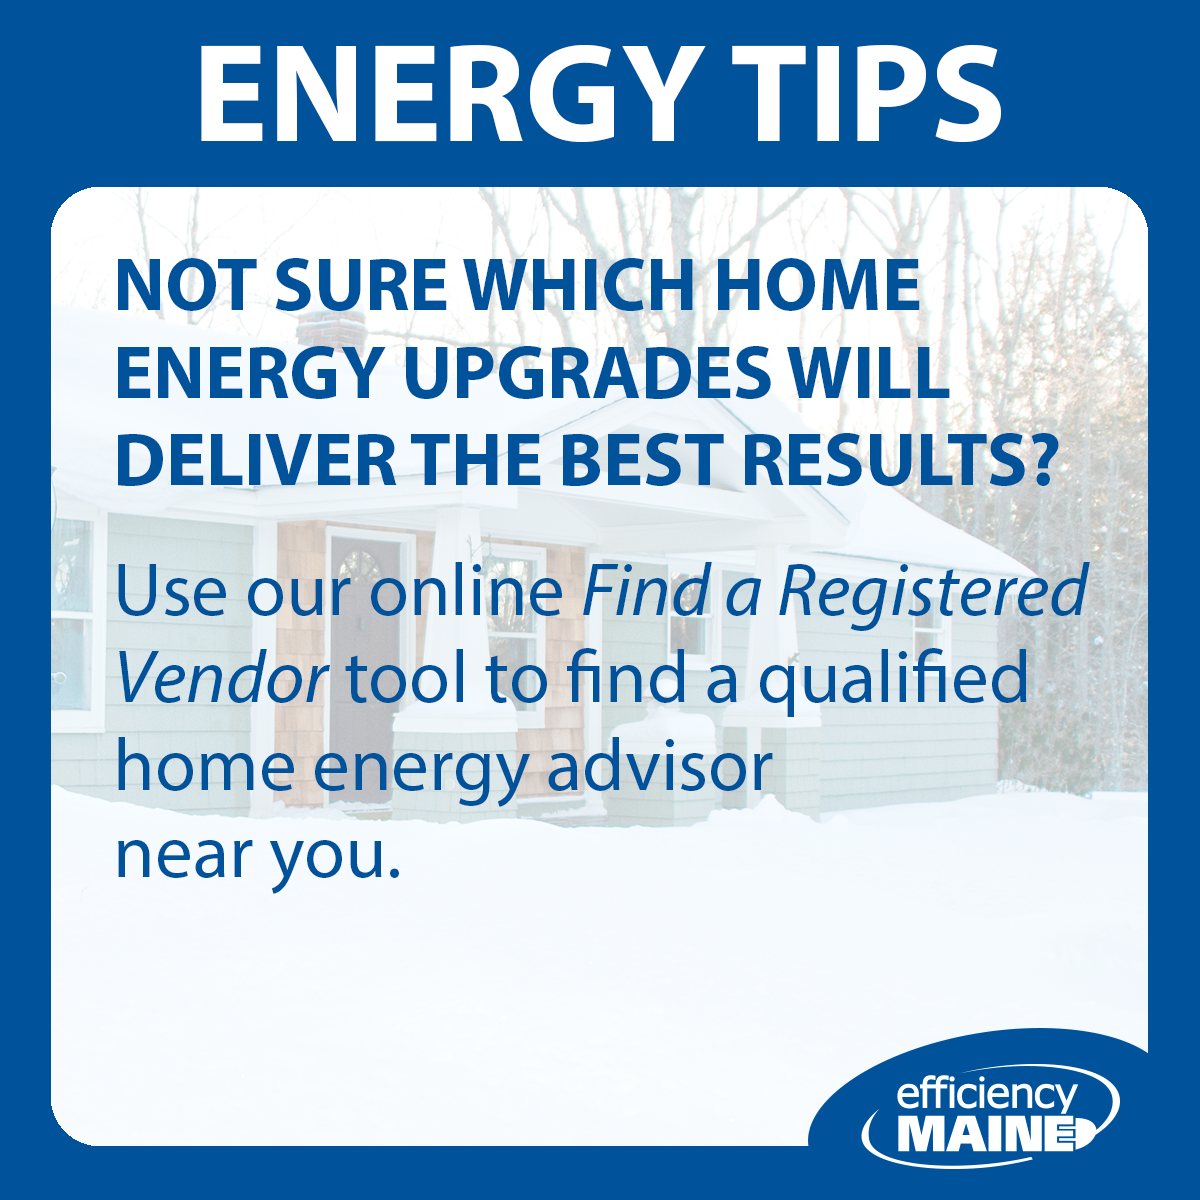 Energy Tips graphic - Promoting use of the search tool to find registered vendors.